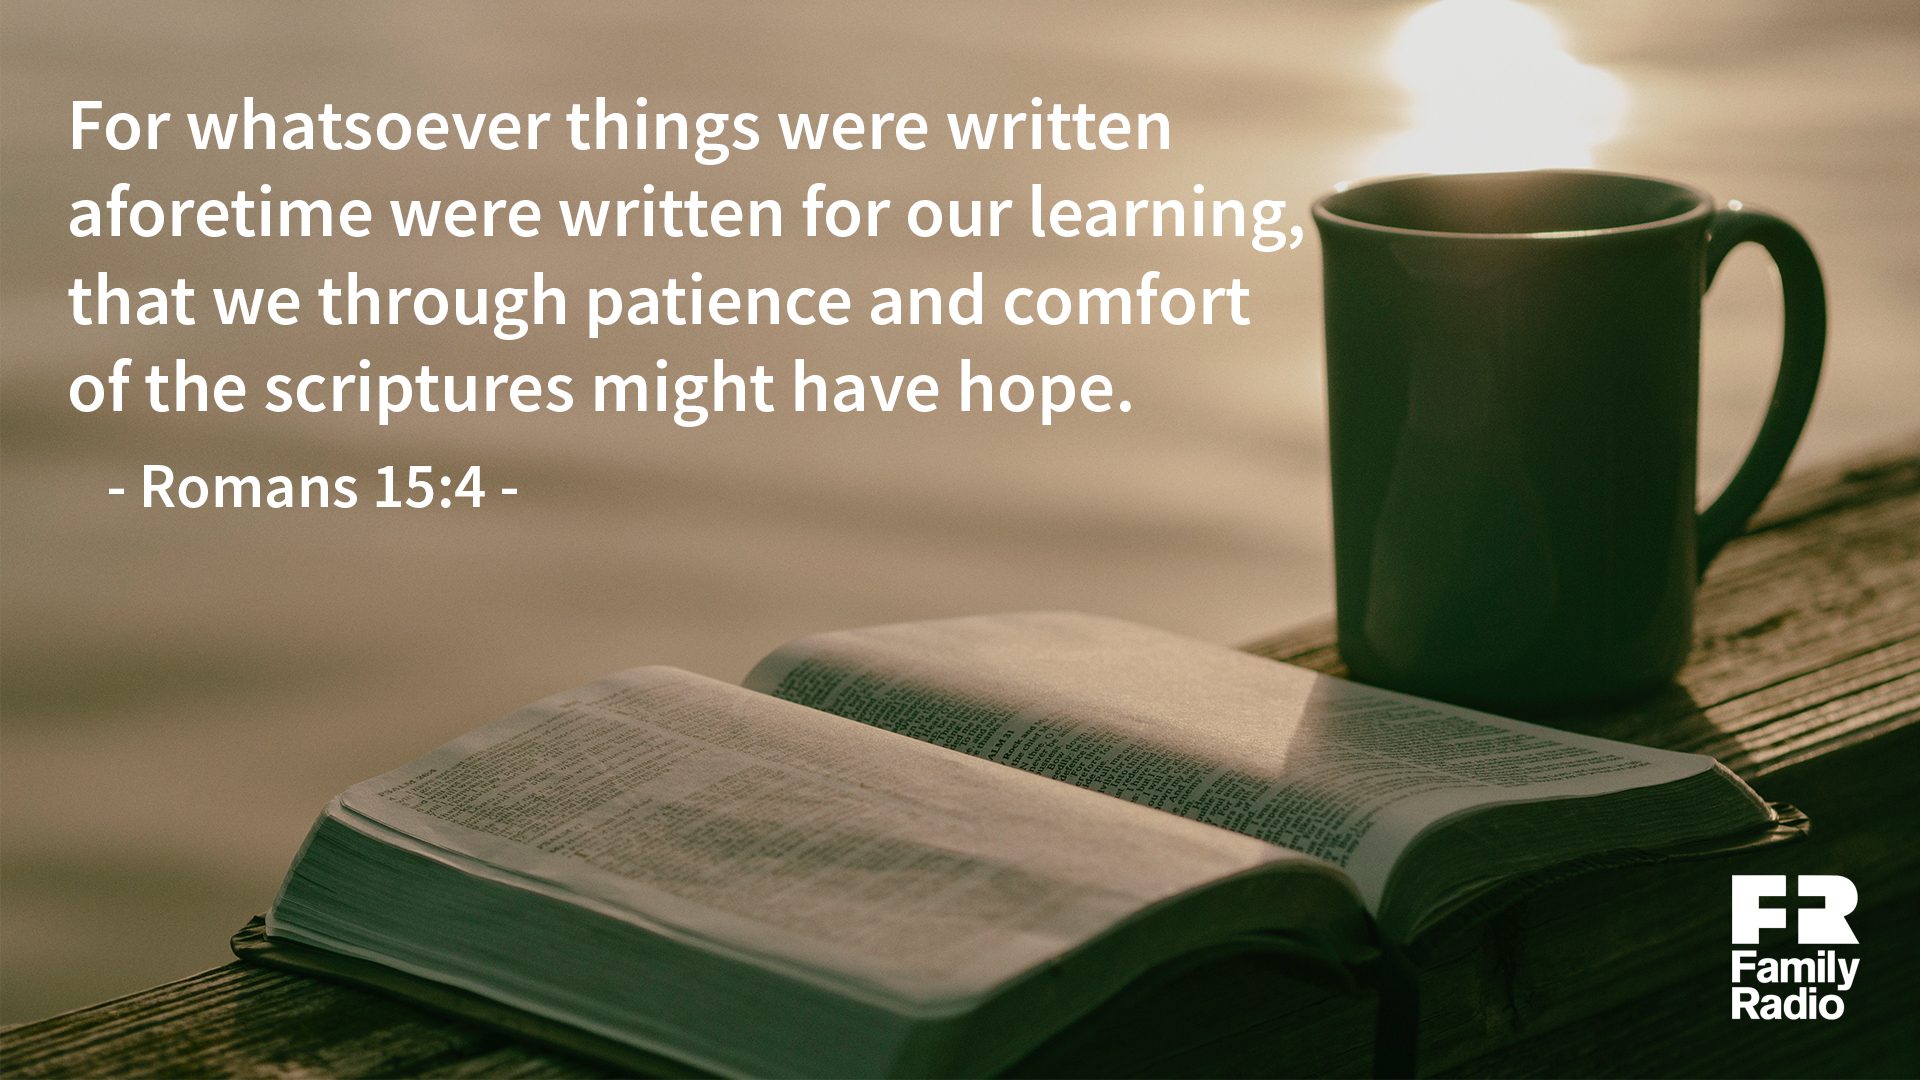 "For whatsoever things were written aforetime were written for our learning that we through patience and comfort of the scriptures might have hope."